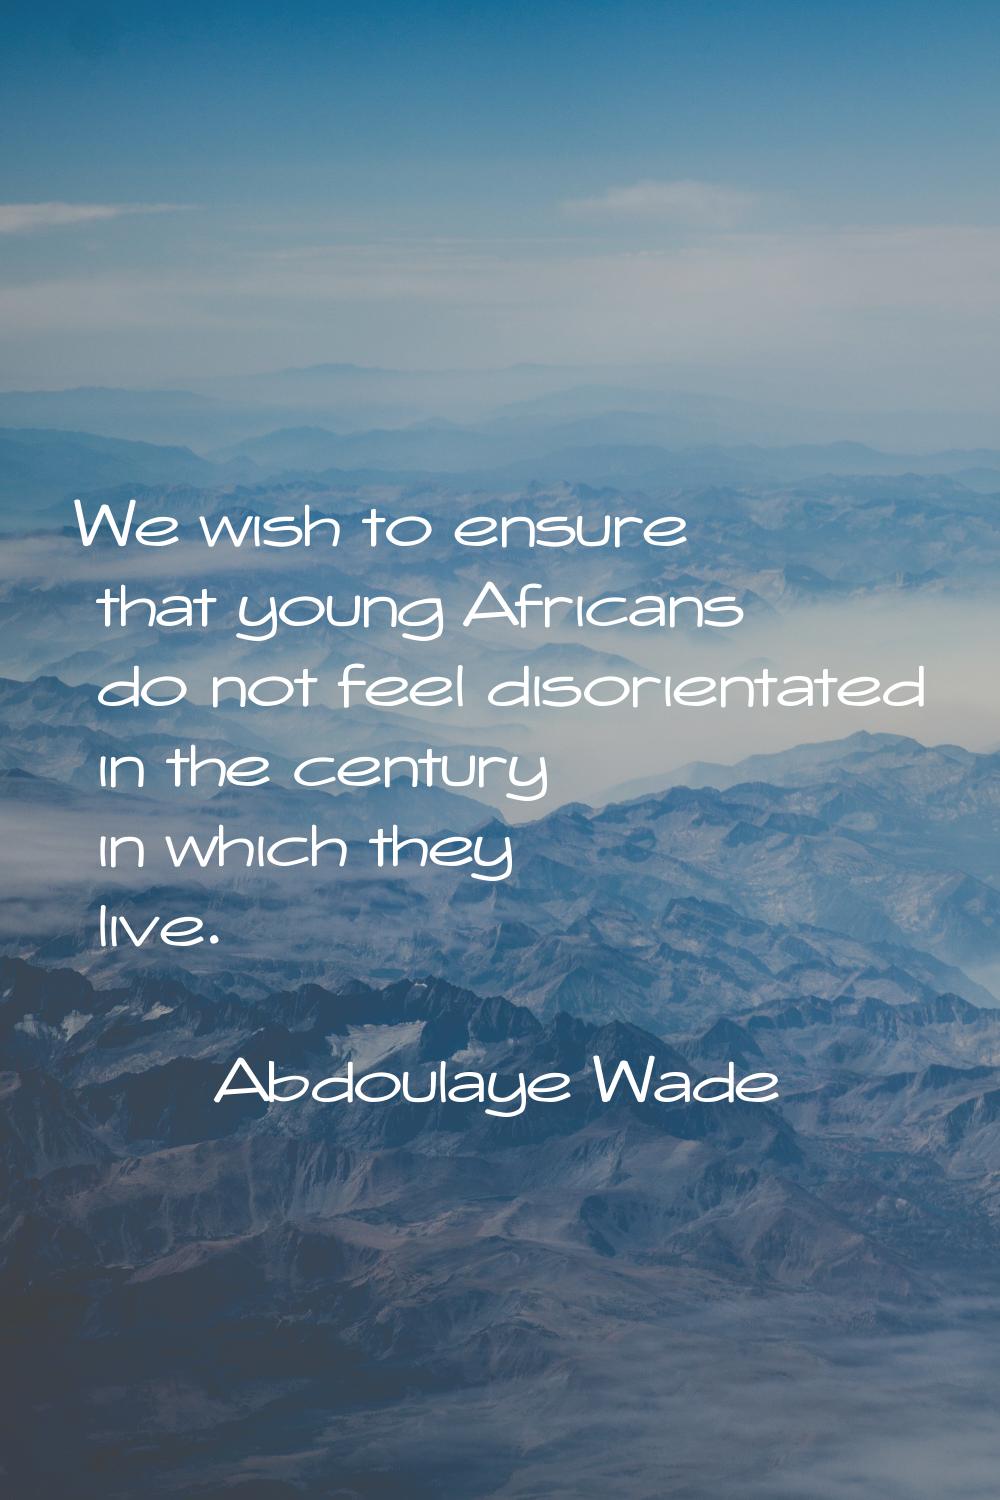 We wish to ensure that young Africans do not feel disorientated in the century in which they live.